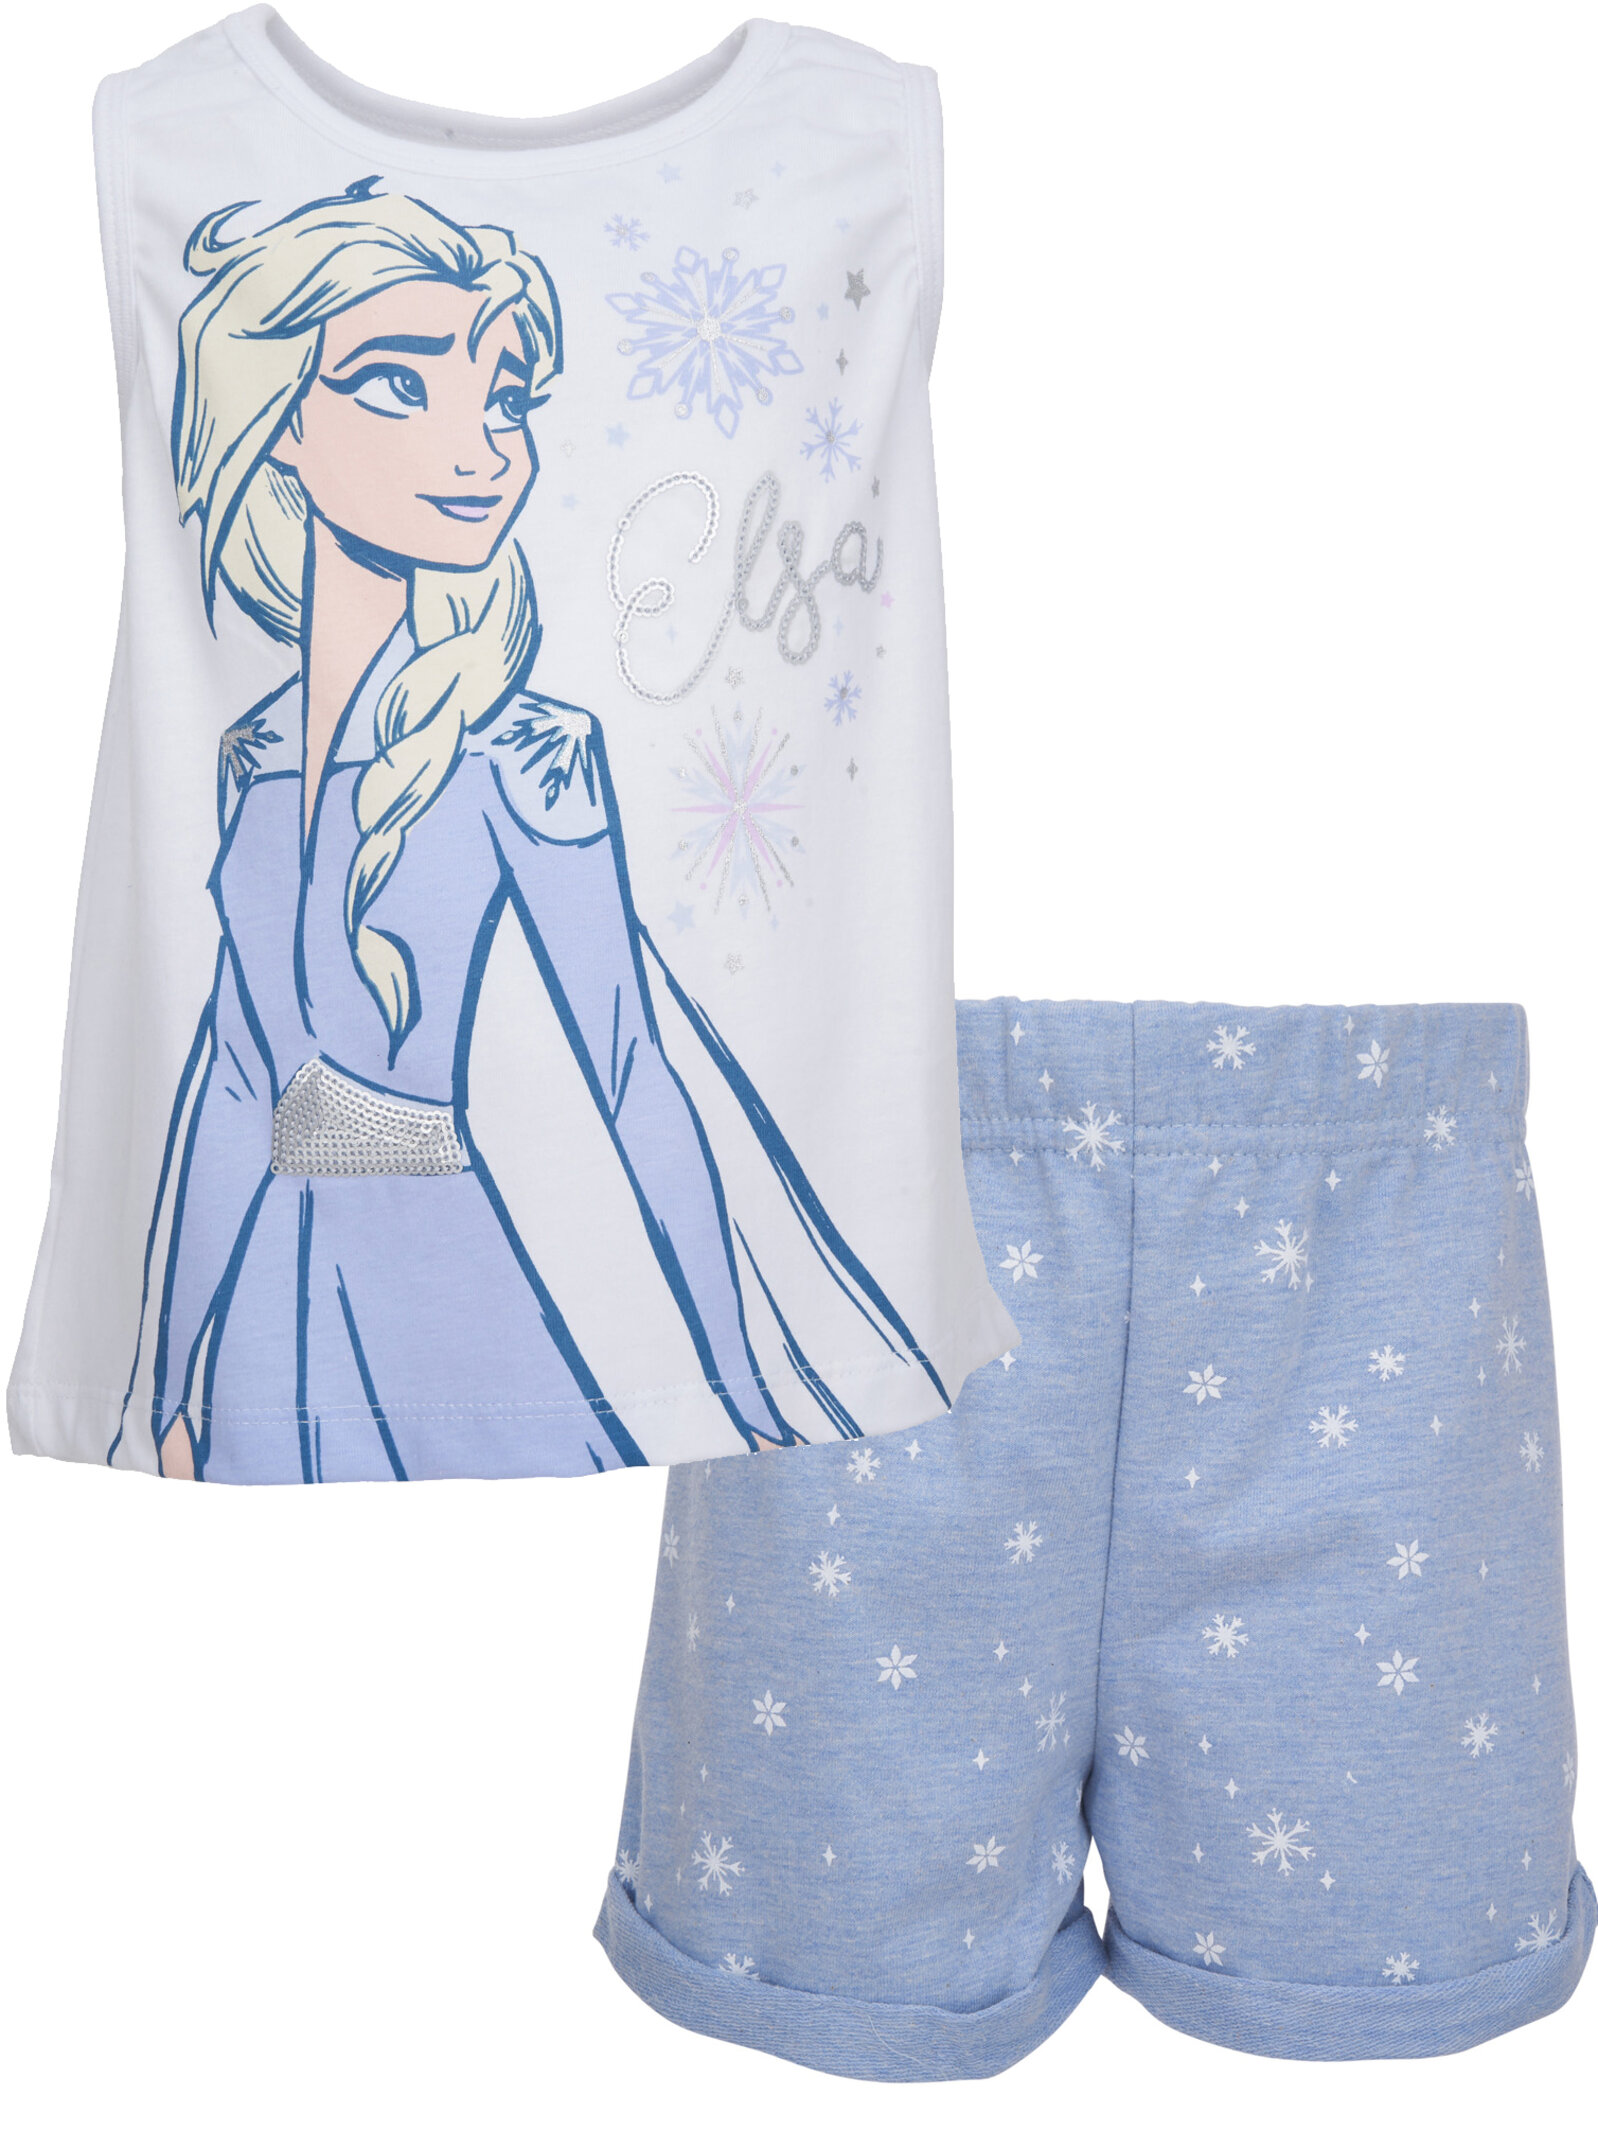 Disney Frozen Elsa Toddler Girls T-Shirt and French Terry Shorts Outfit Set White 2T - image 1 of 5